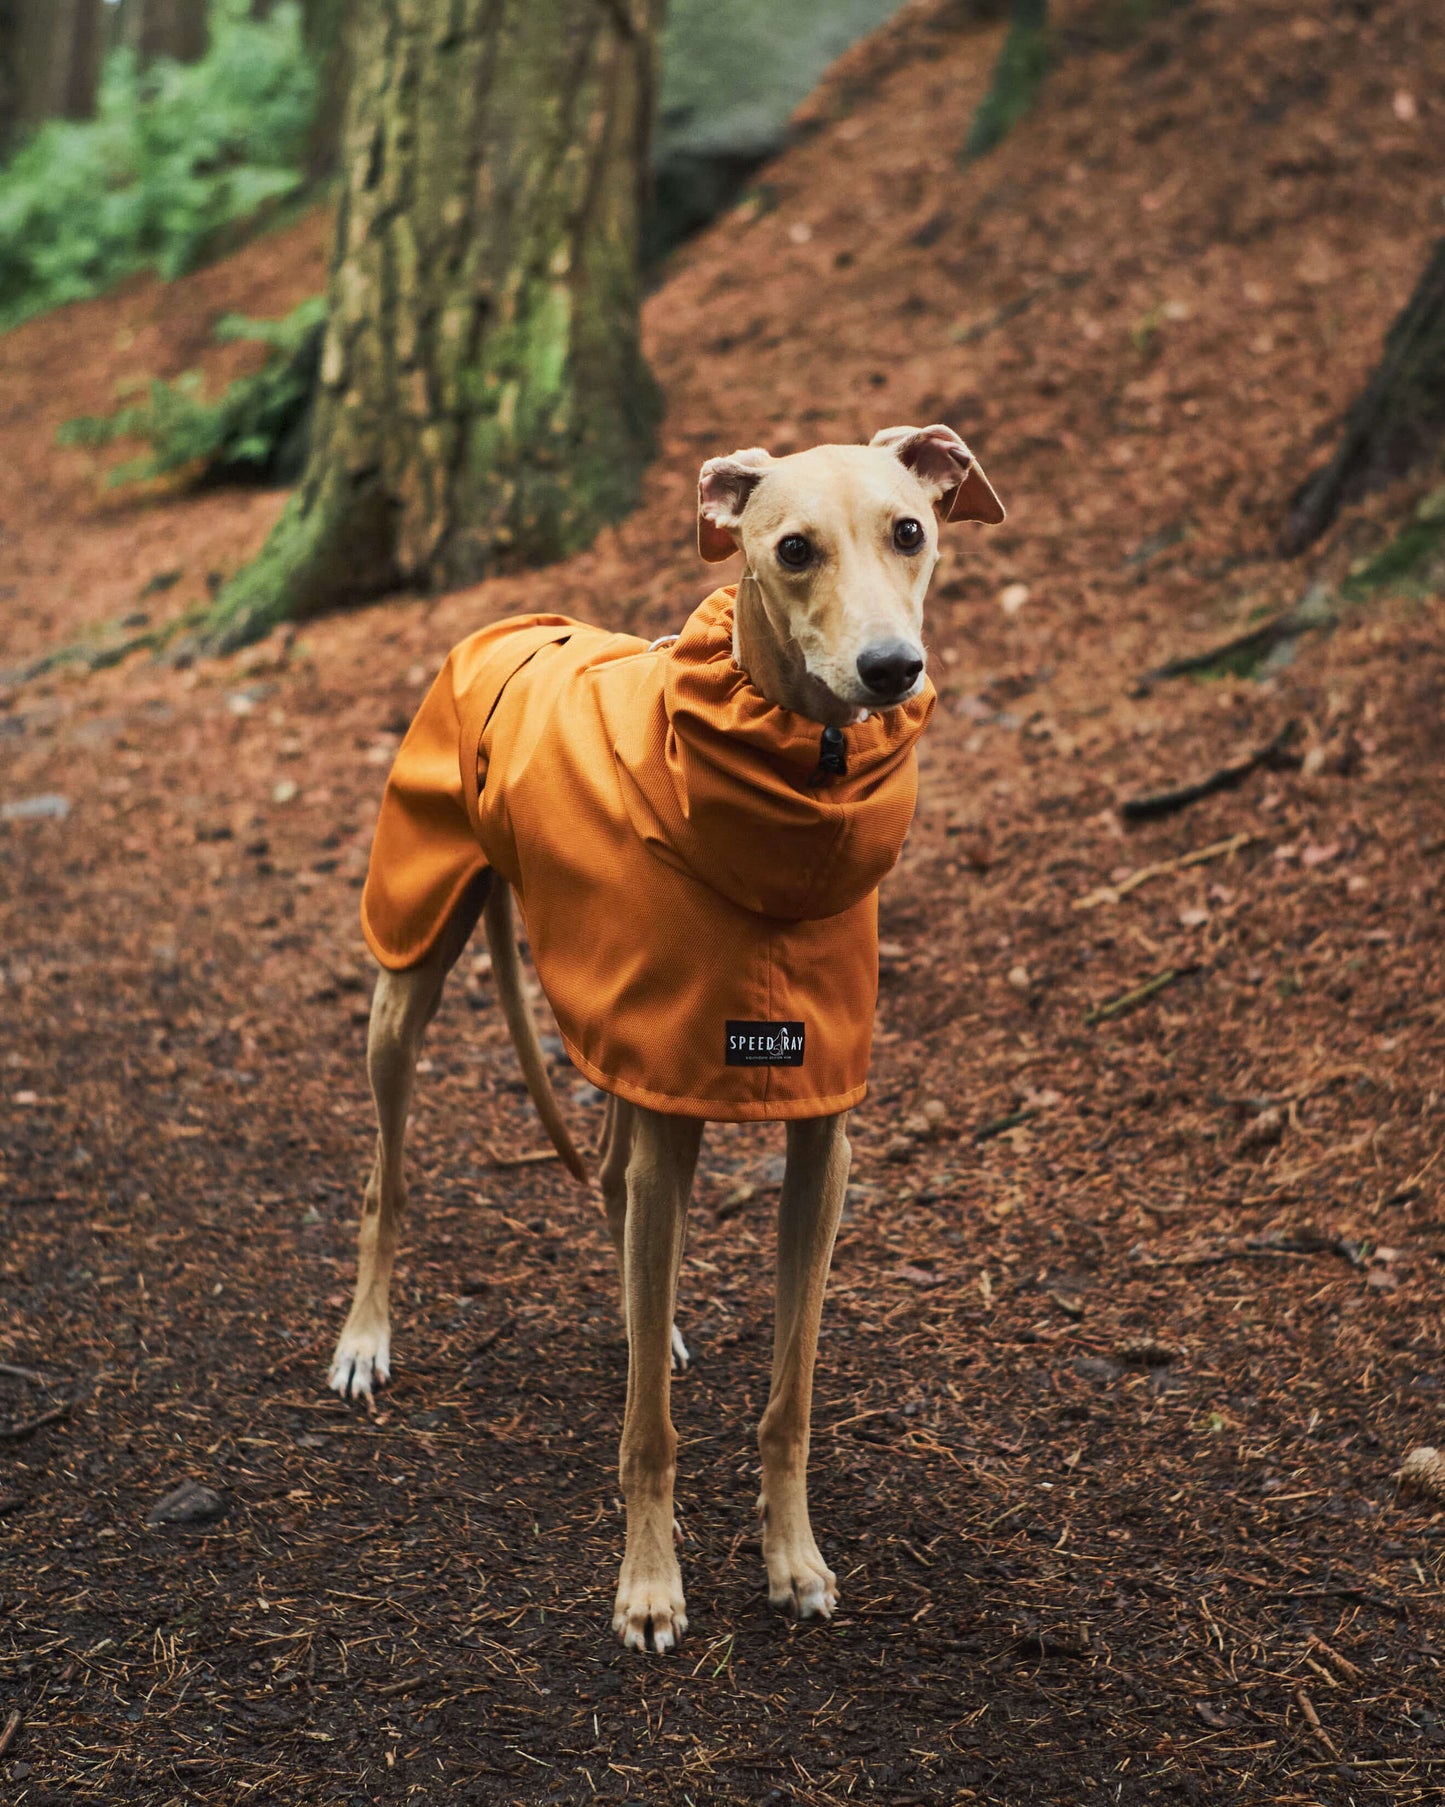 THE ROXY Lightweight, Water Resistant, Whippet Raincoat (Lights)